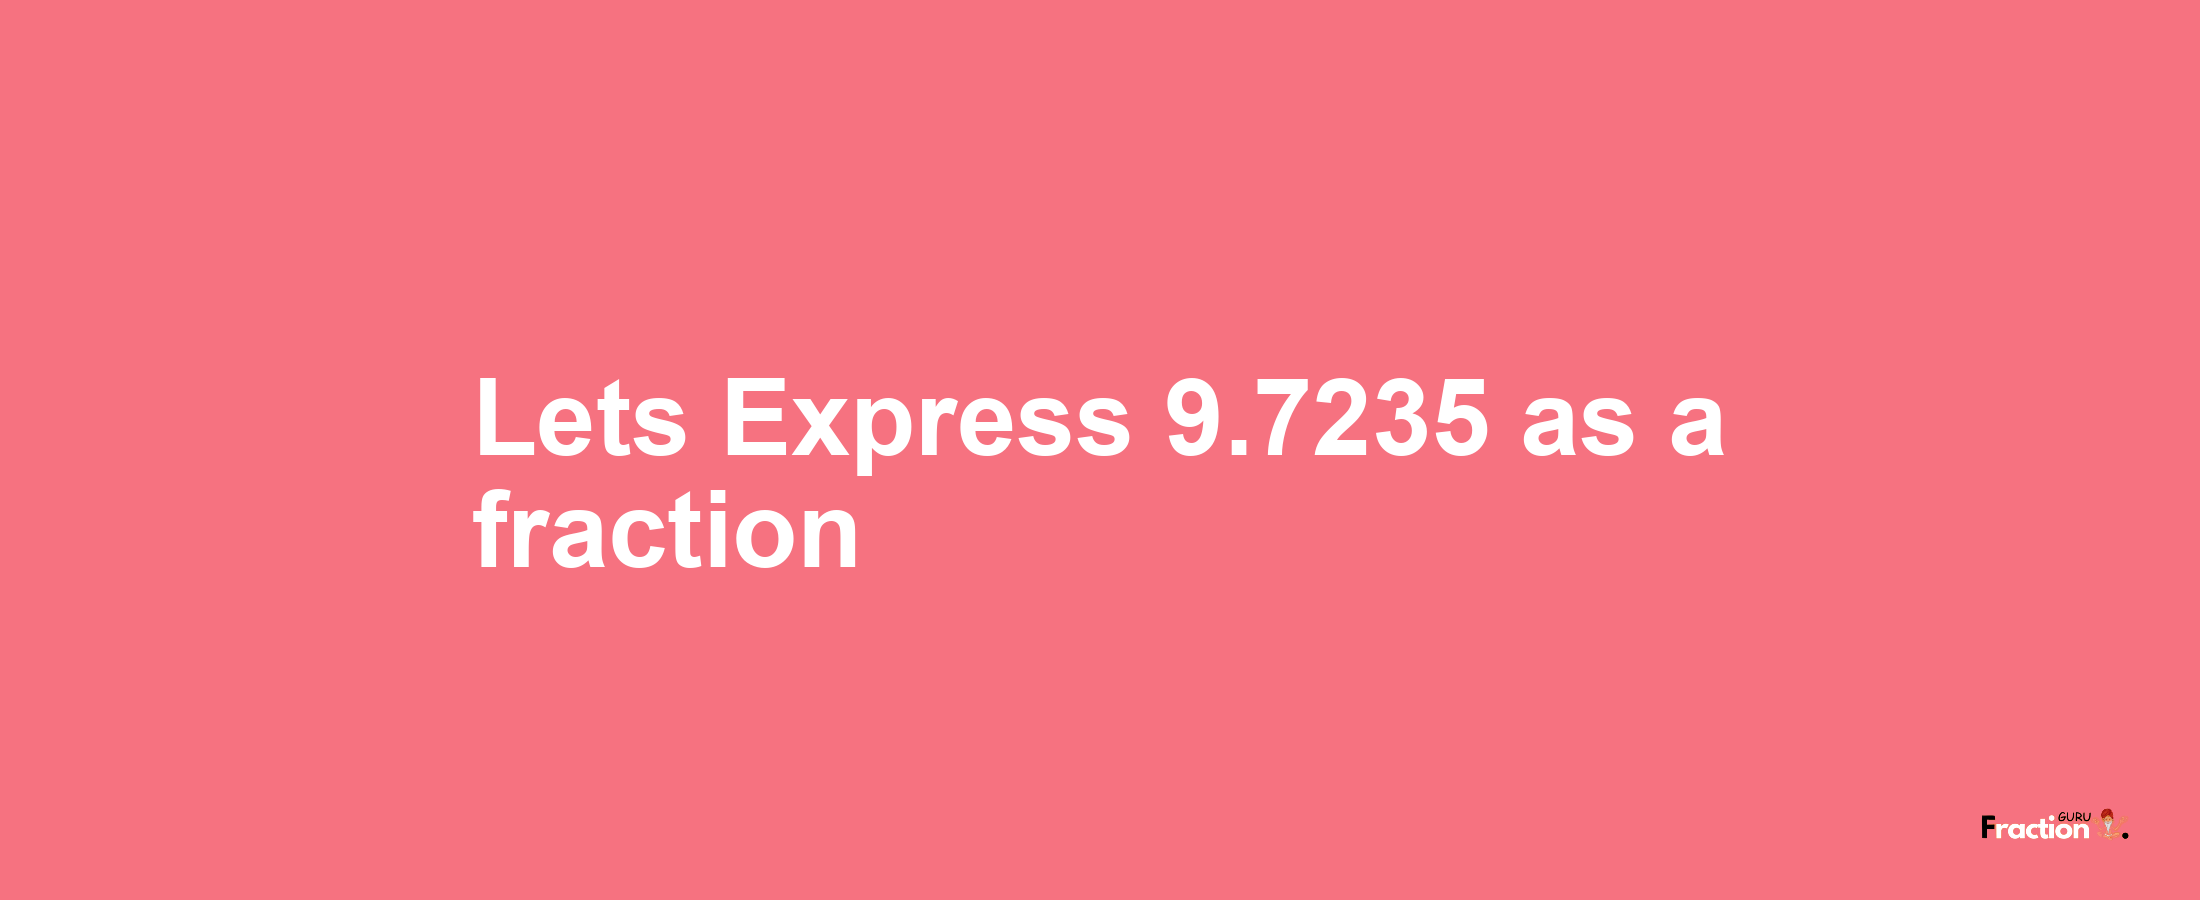 Lets Express 9.7235 as afraction